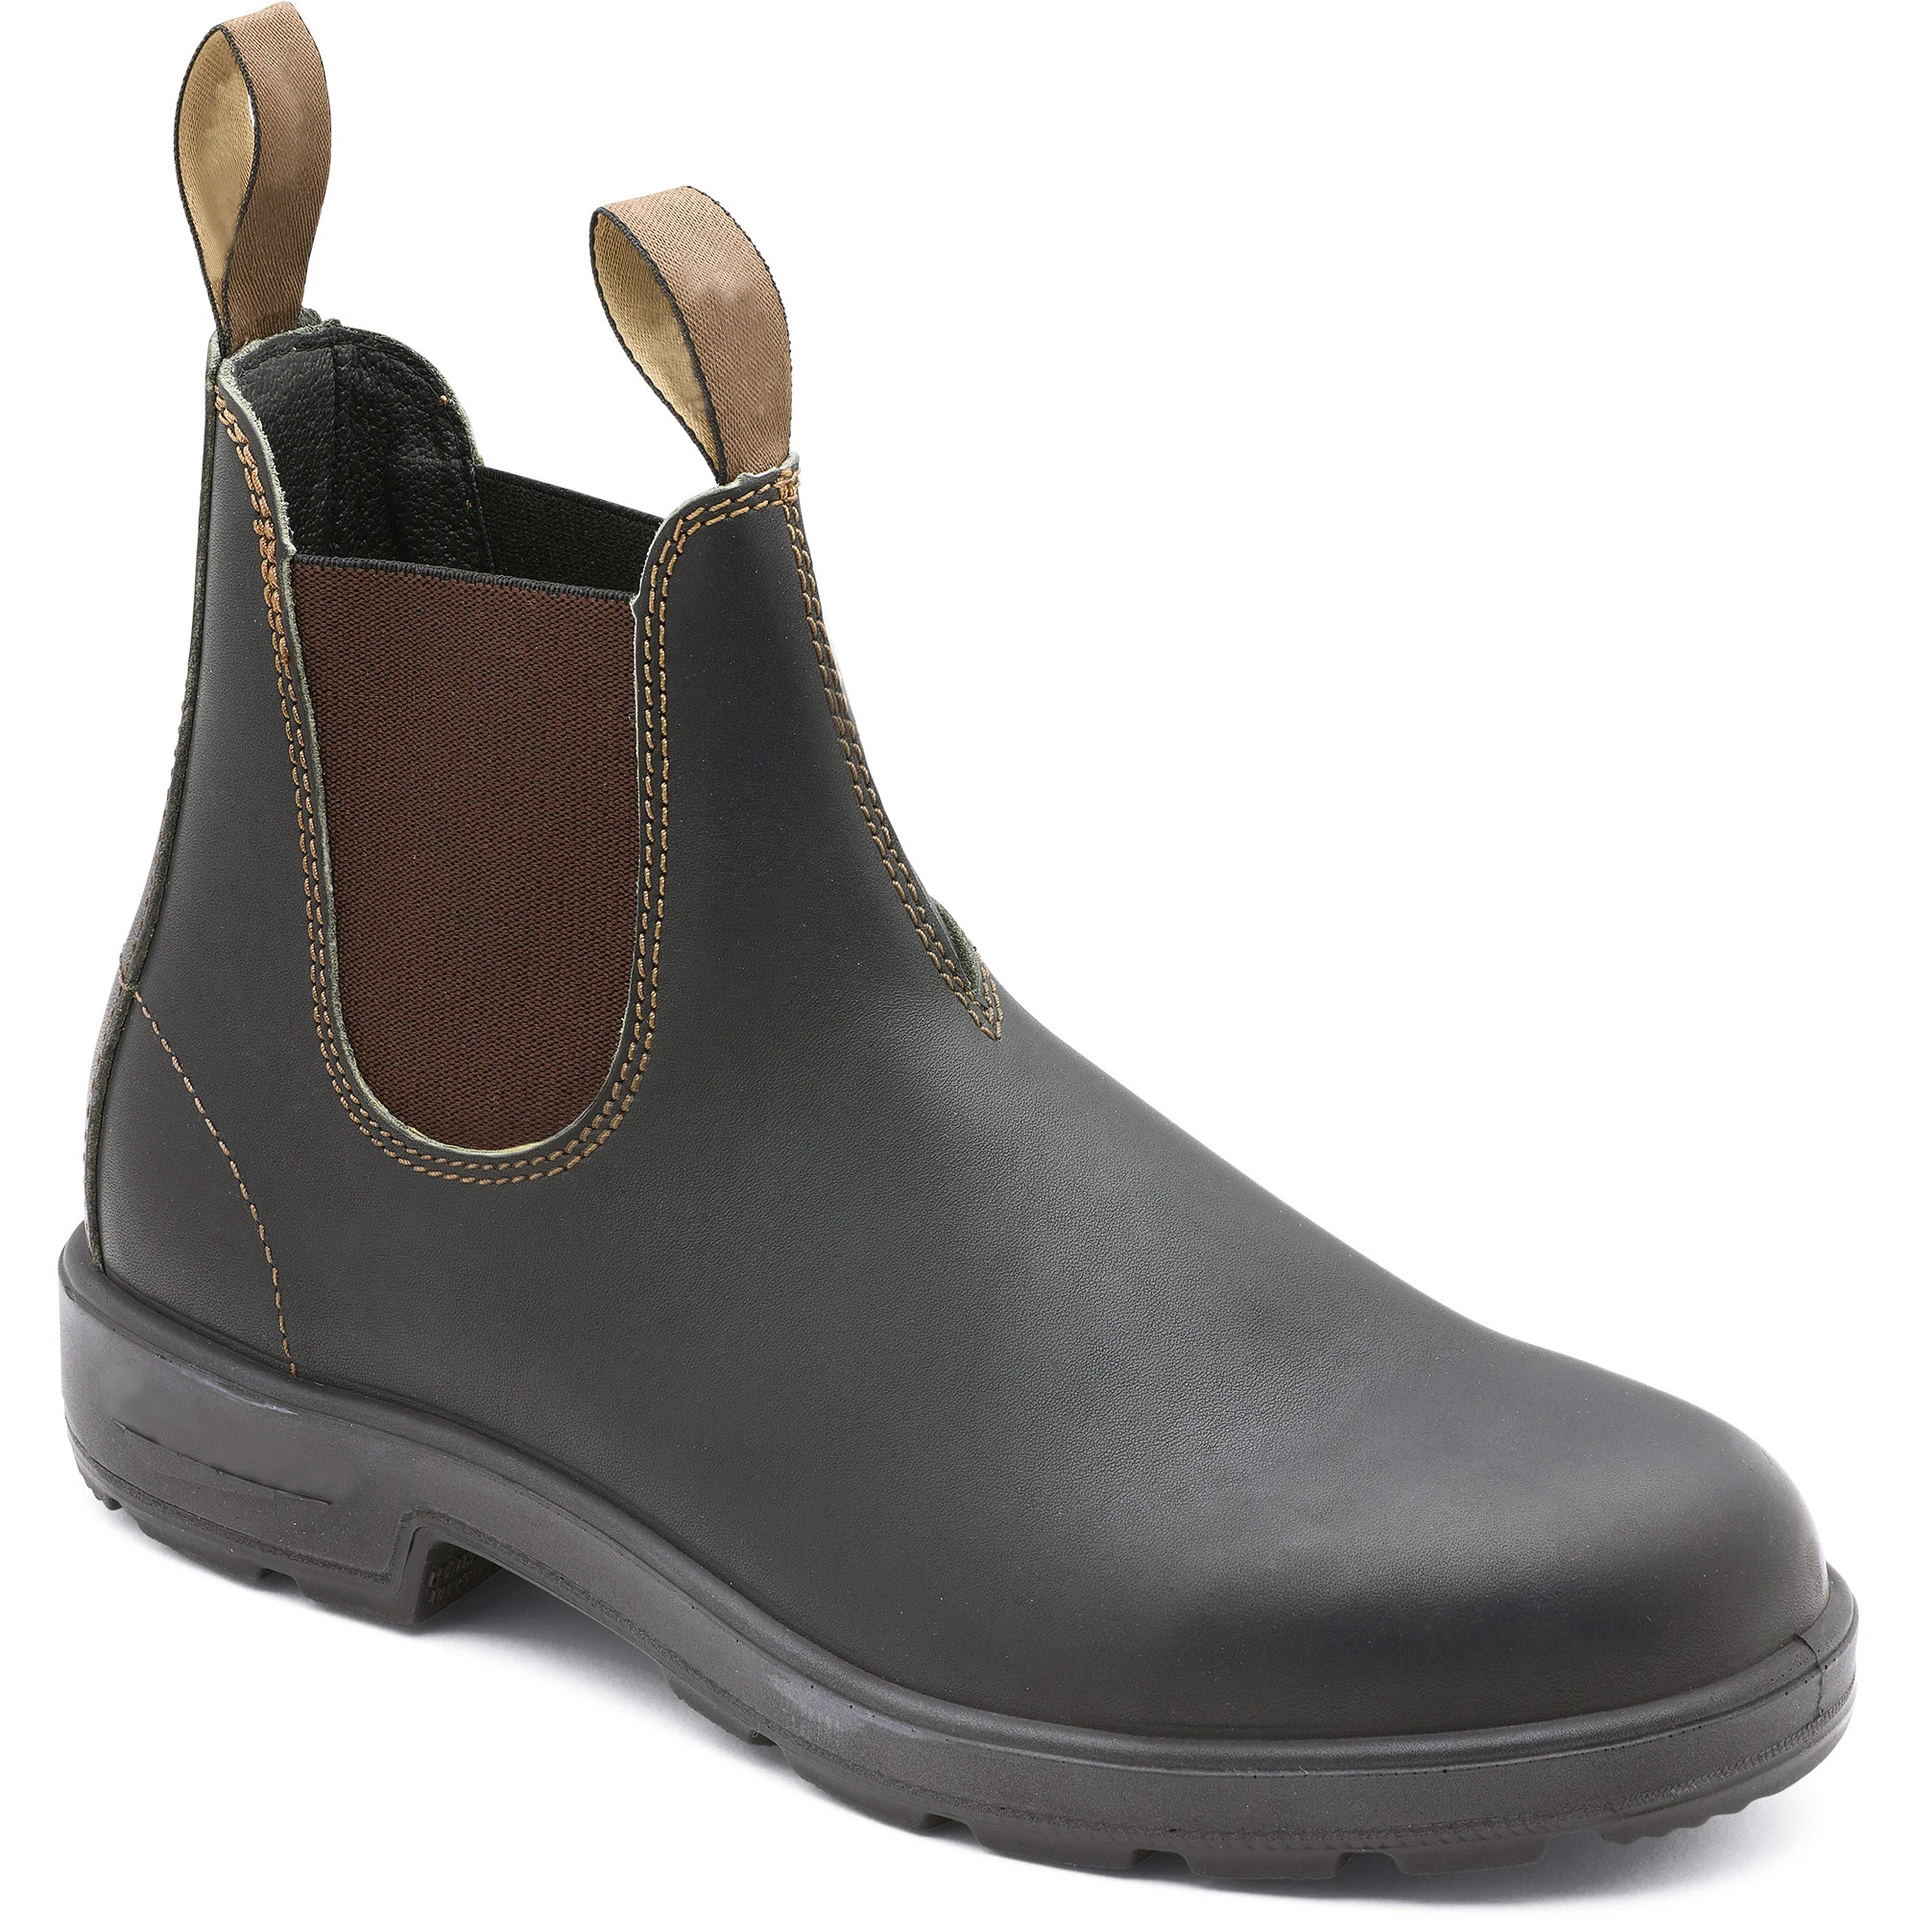 Spring Autumn Men's Chelsea Boots Colored Vintage Leather Boot #6585